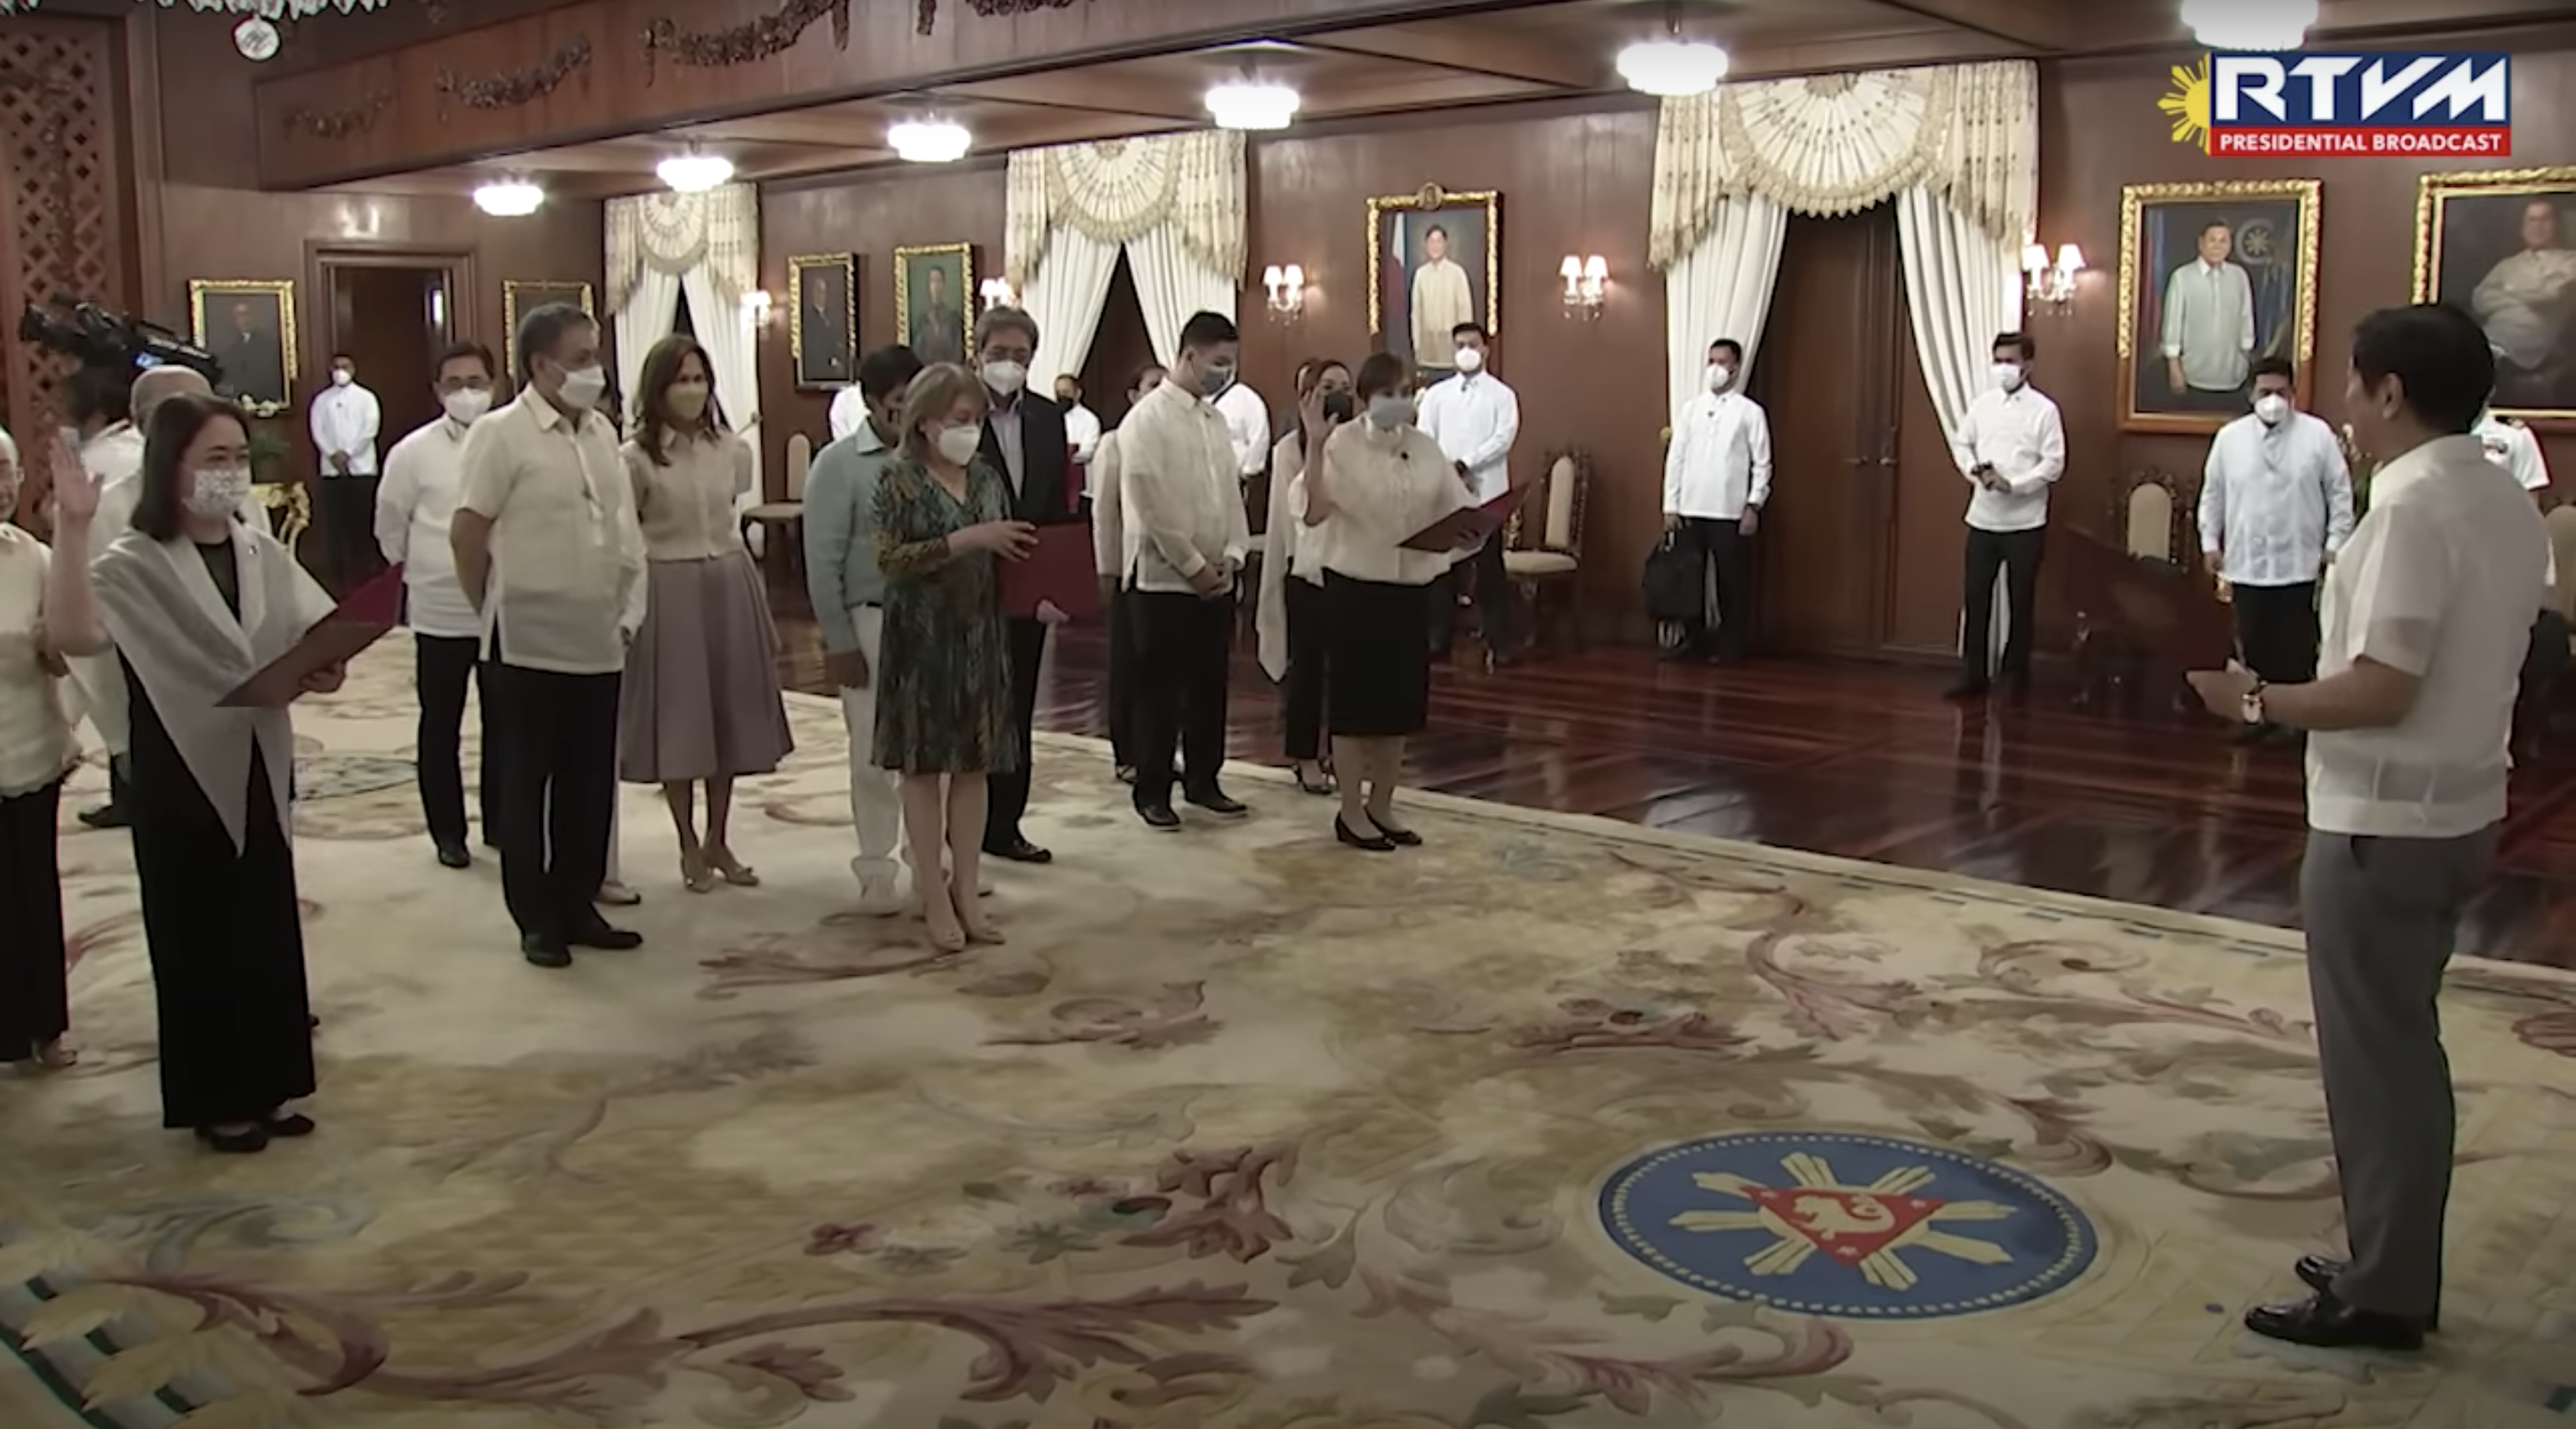 oathtaking of new gov't officials